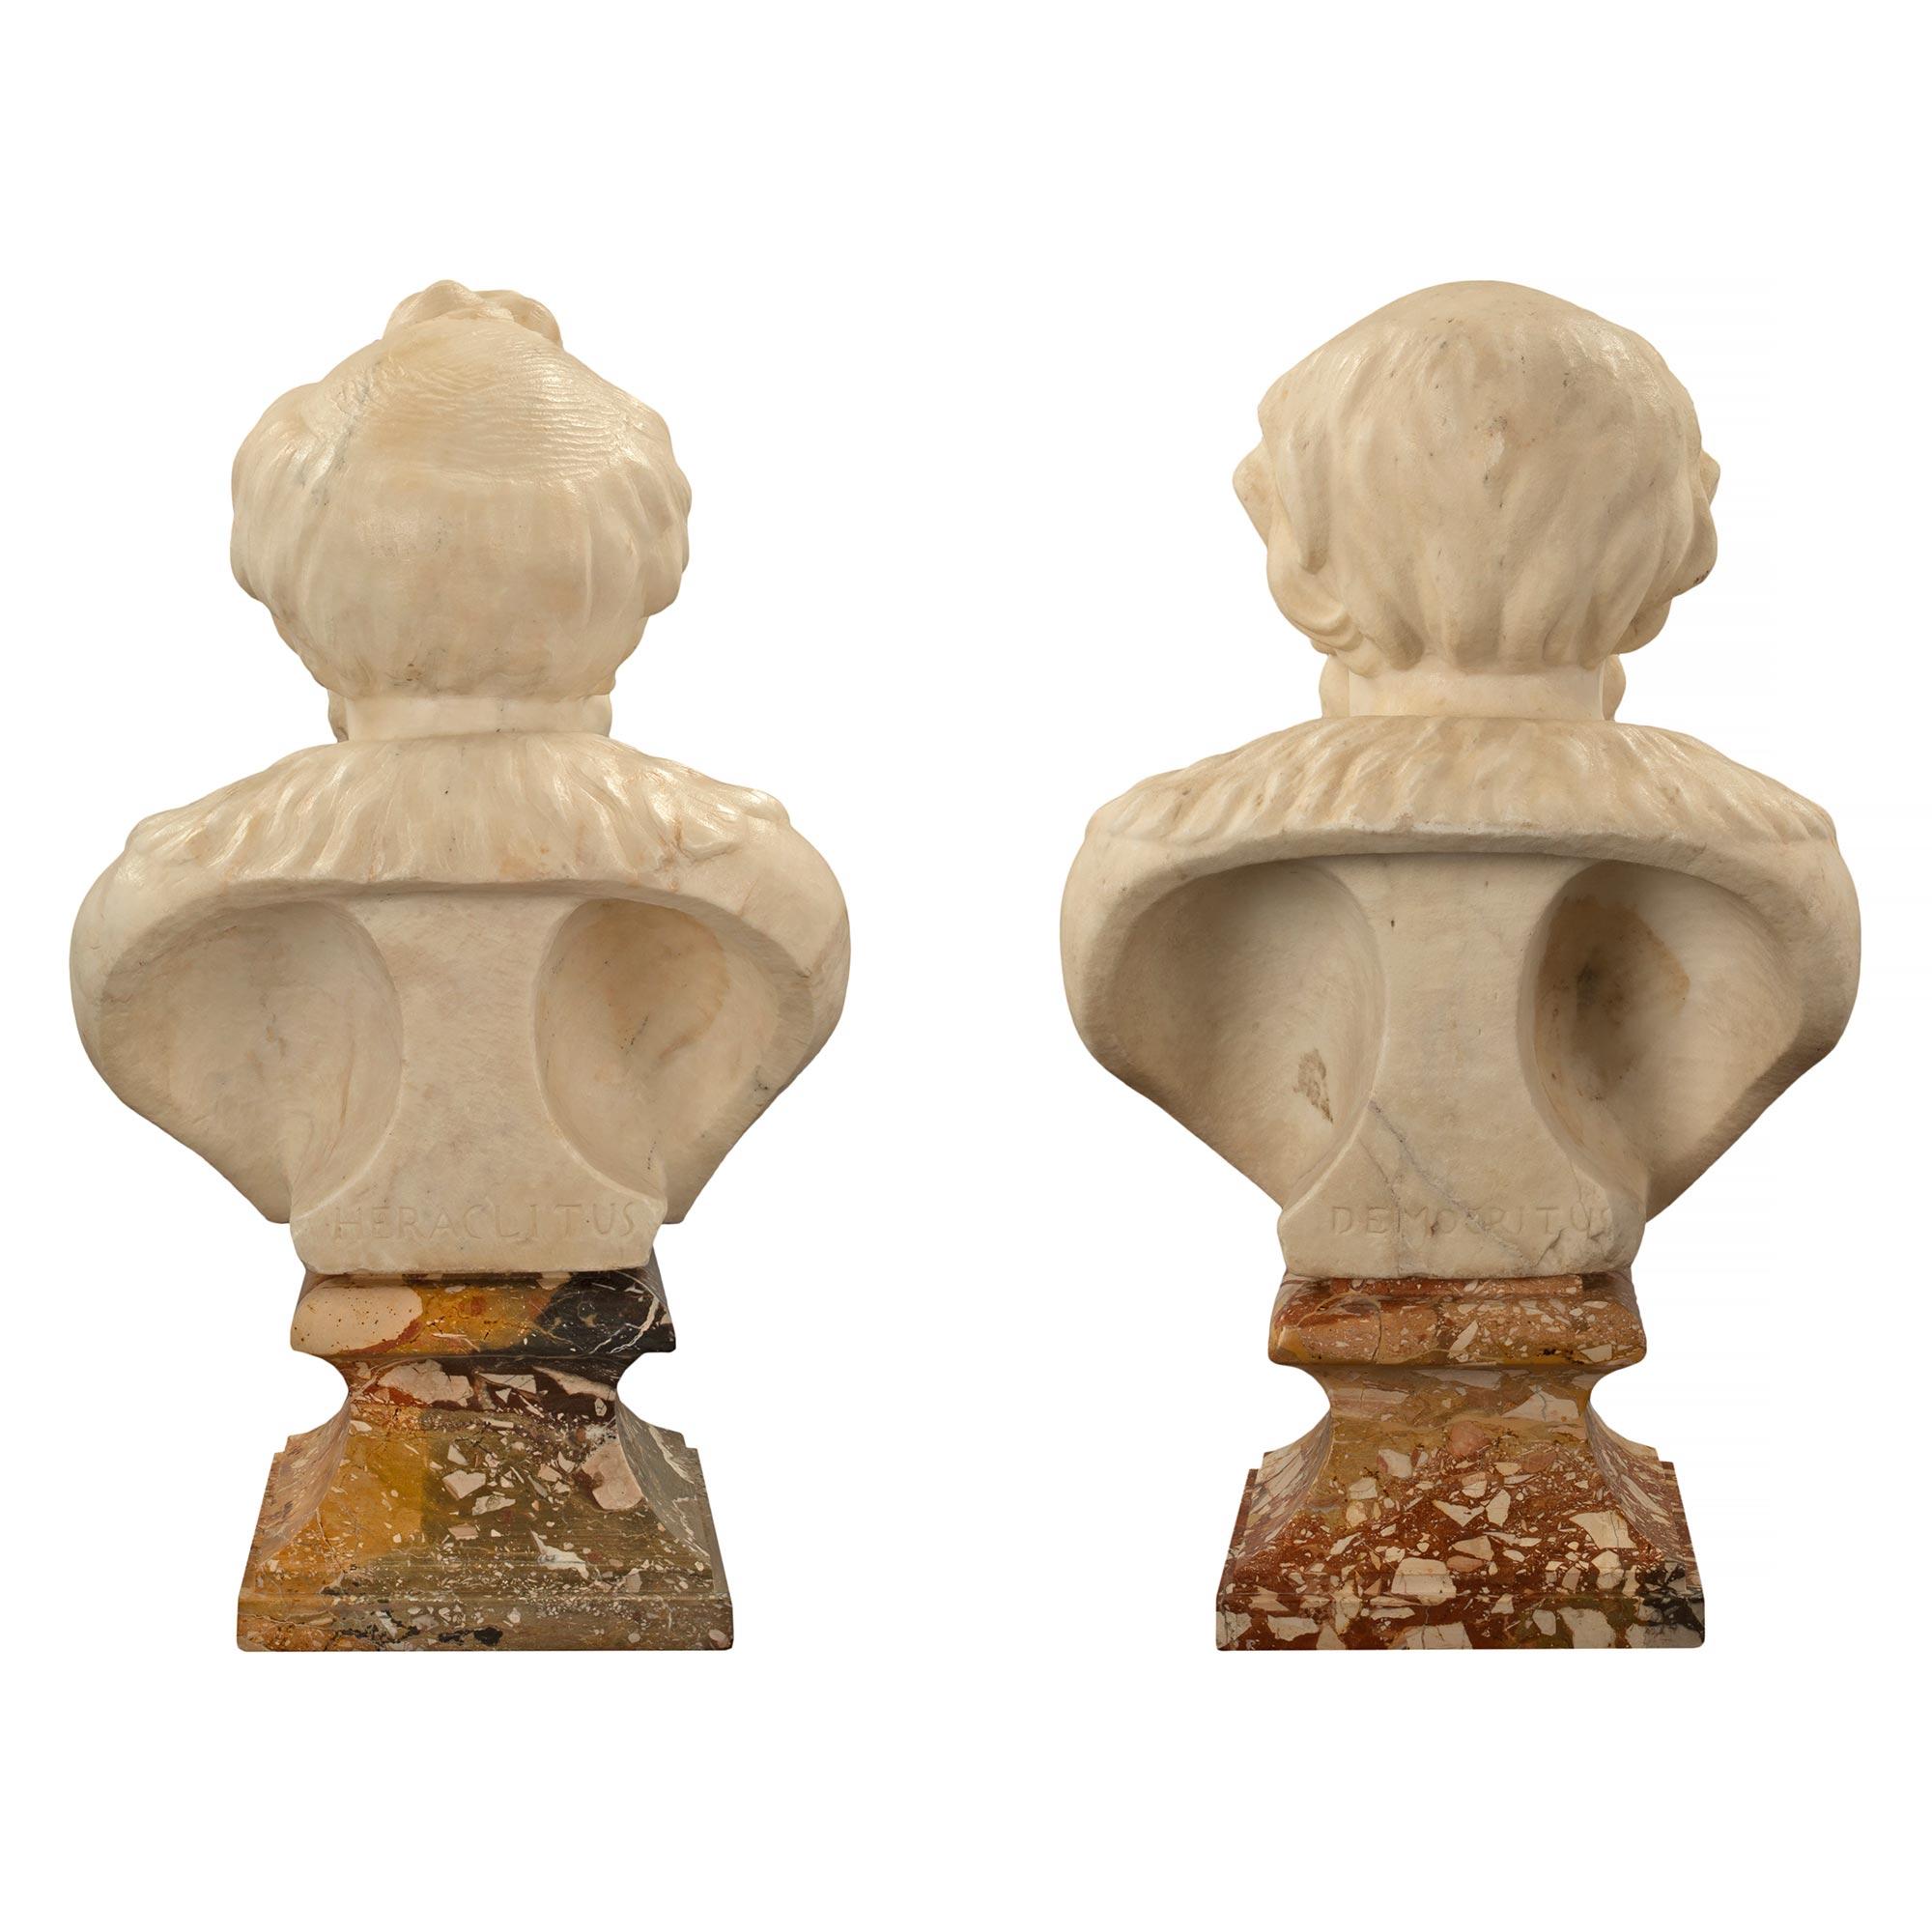 Pair of Italian 18th Century Marble Busts of Democritus and Heraclitus For Sale 1